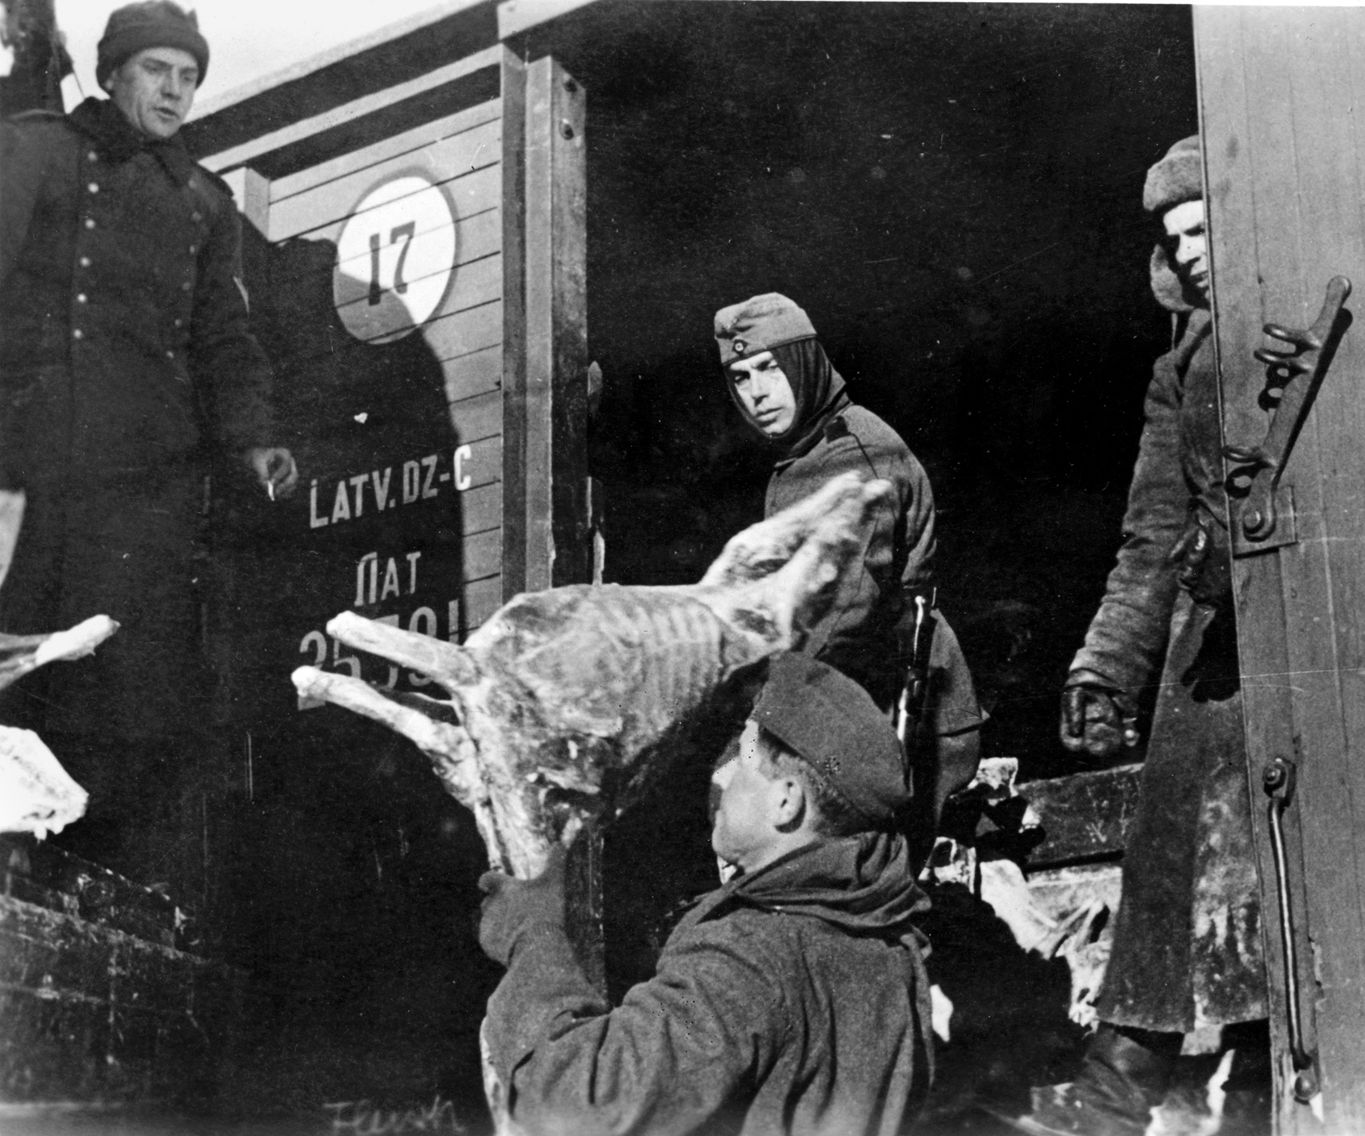 LATVIAN IMPORTS: German soldiers appear to be unloading provisions from a Latvian railroad car; Soviet Cyrillic lettering is visible.  Operation Barbarossa, launched on June 22, 1941, quickly overran the Baltic States of Latvia, Lithuania, and Estonia, displacing Red Army forces that had previously annexed and occupied those countries as a result of the 1939 German-Soviet Non-Aggression Pact that had enabled the division of Poland between the two countries.